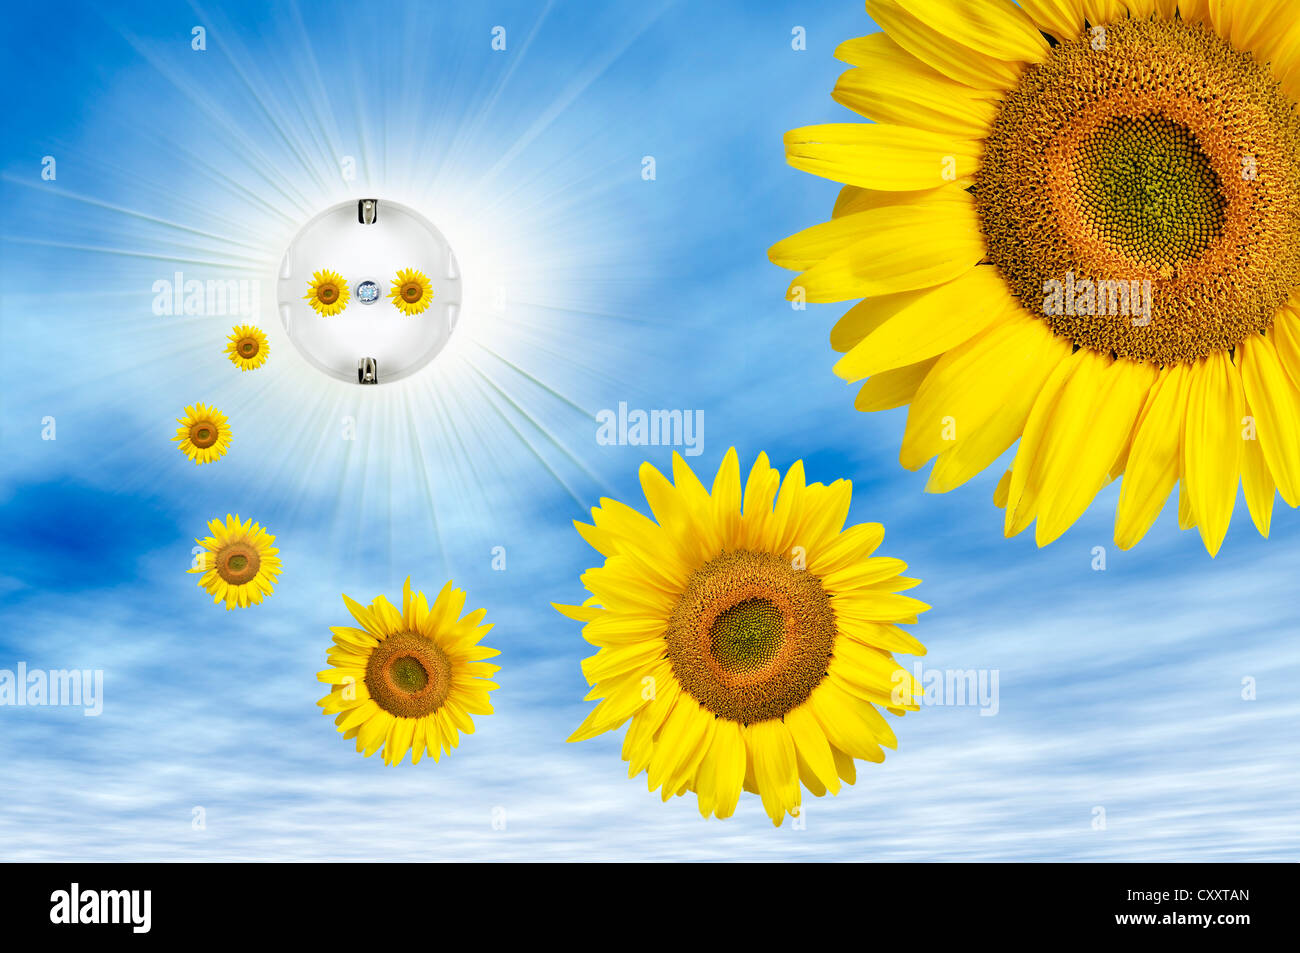 Symbolic image for solar energy, sun flowers flying out of an electric socket with sunbeams in the sky Stock Photo